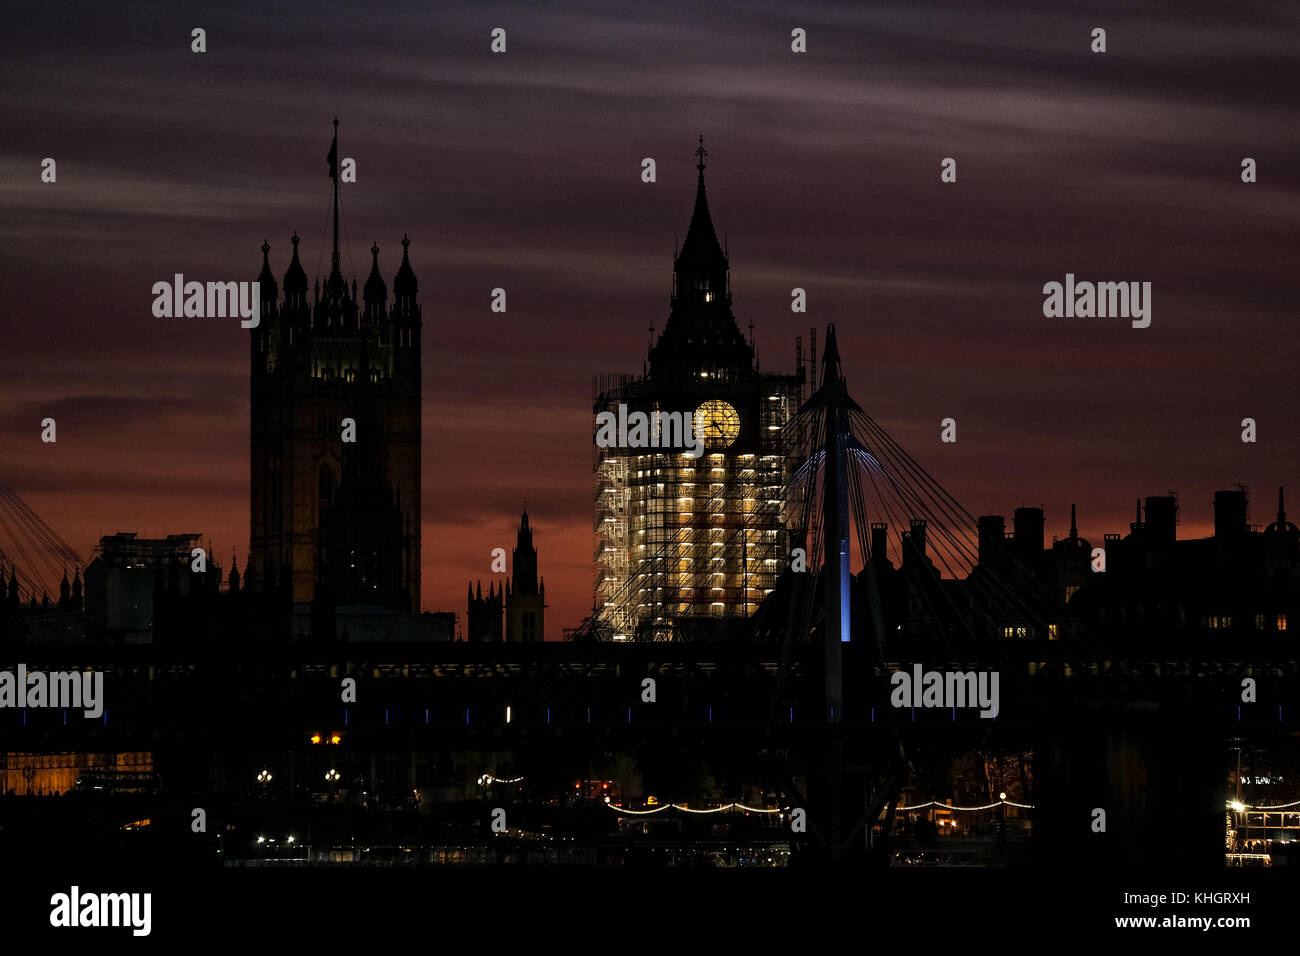 Friday 17th November 2017. London England. London is greeted with a wonderful sunset to mark the end of Friday as commuters come out of work and stop to photograph the spectacle. Elizabeth Tower( Big Ben) clock face peeks out from the scaffolding surrounding the tower. Paul Watts/ Alamy live news Stock Photo